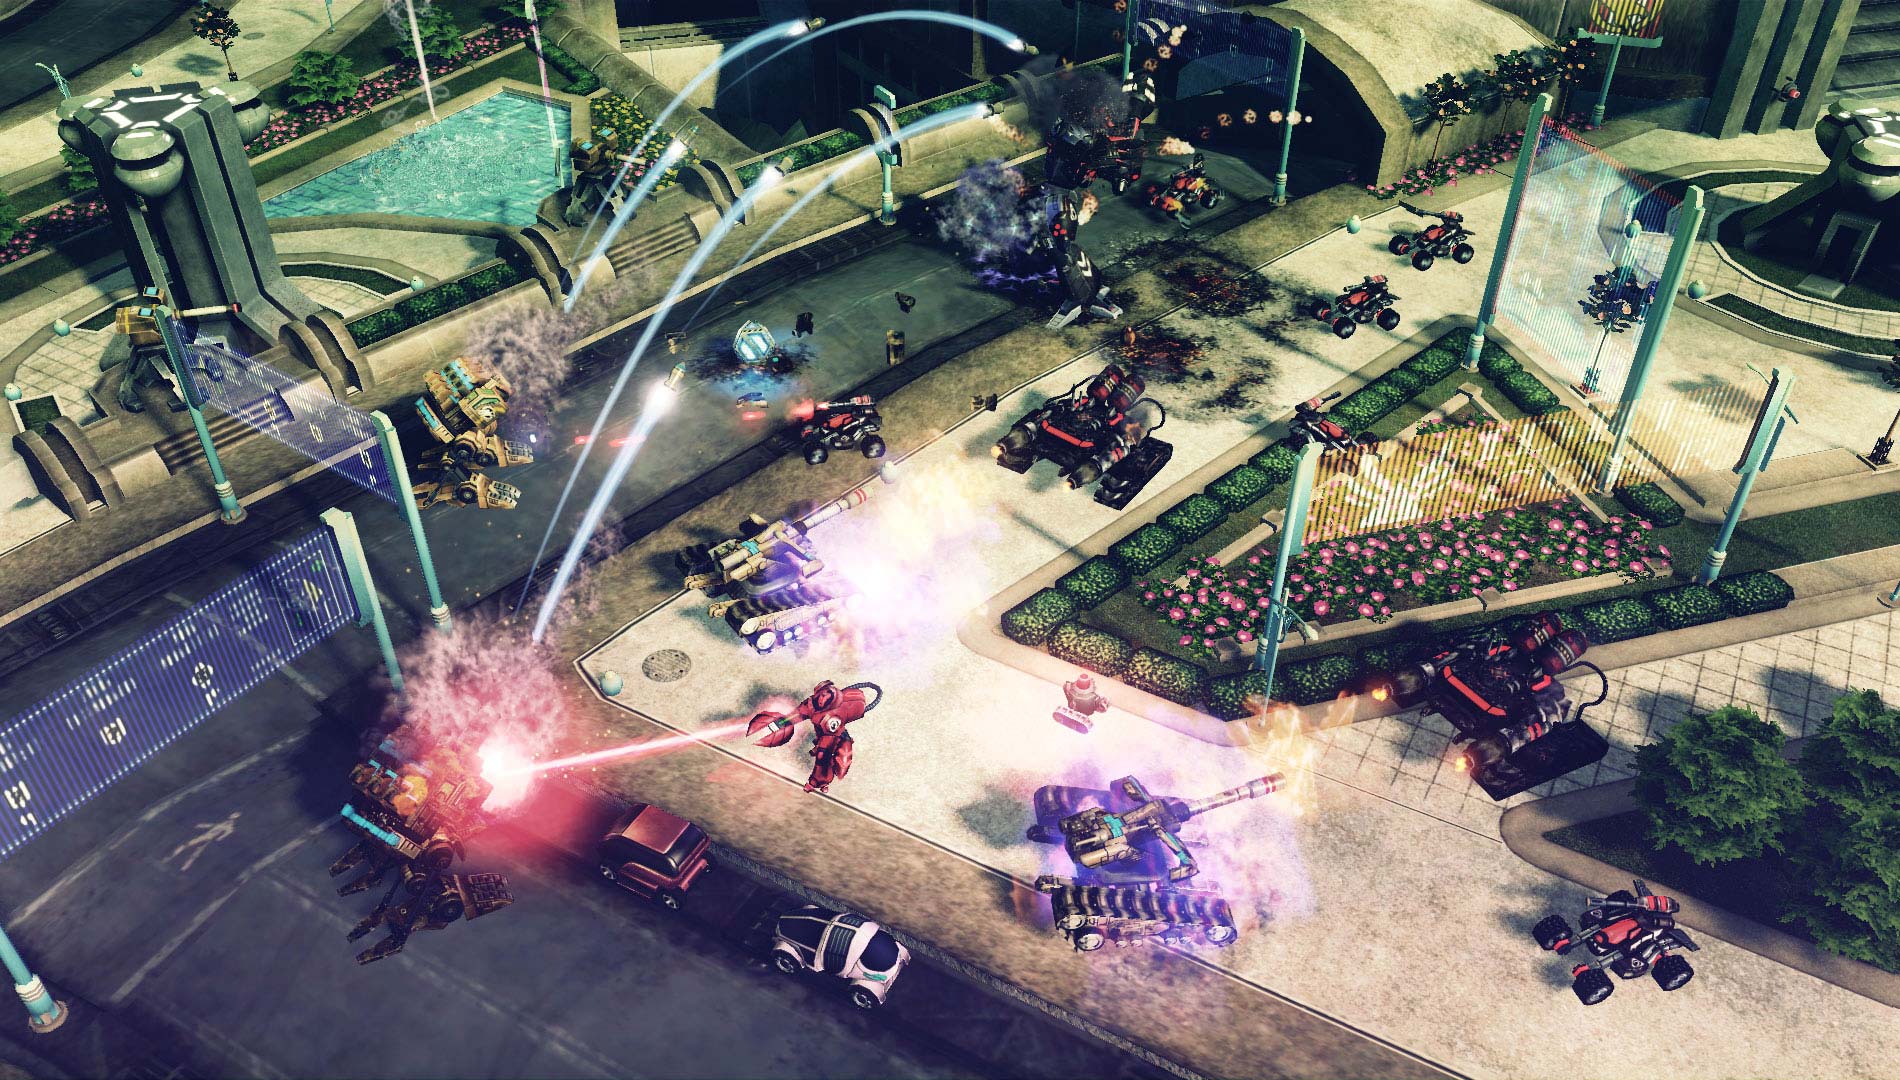 Command and conquer 4 tiberian twilight. Command & Conquer 4: Tiberian Twilight. Command Conquer 4 Tiberium Wars. C C 4 Tiberian Twilight. Tiberium Twilight 4.